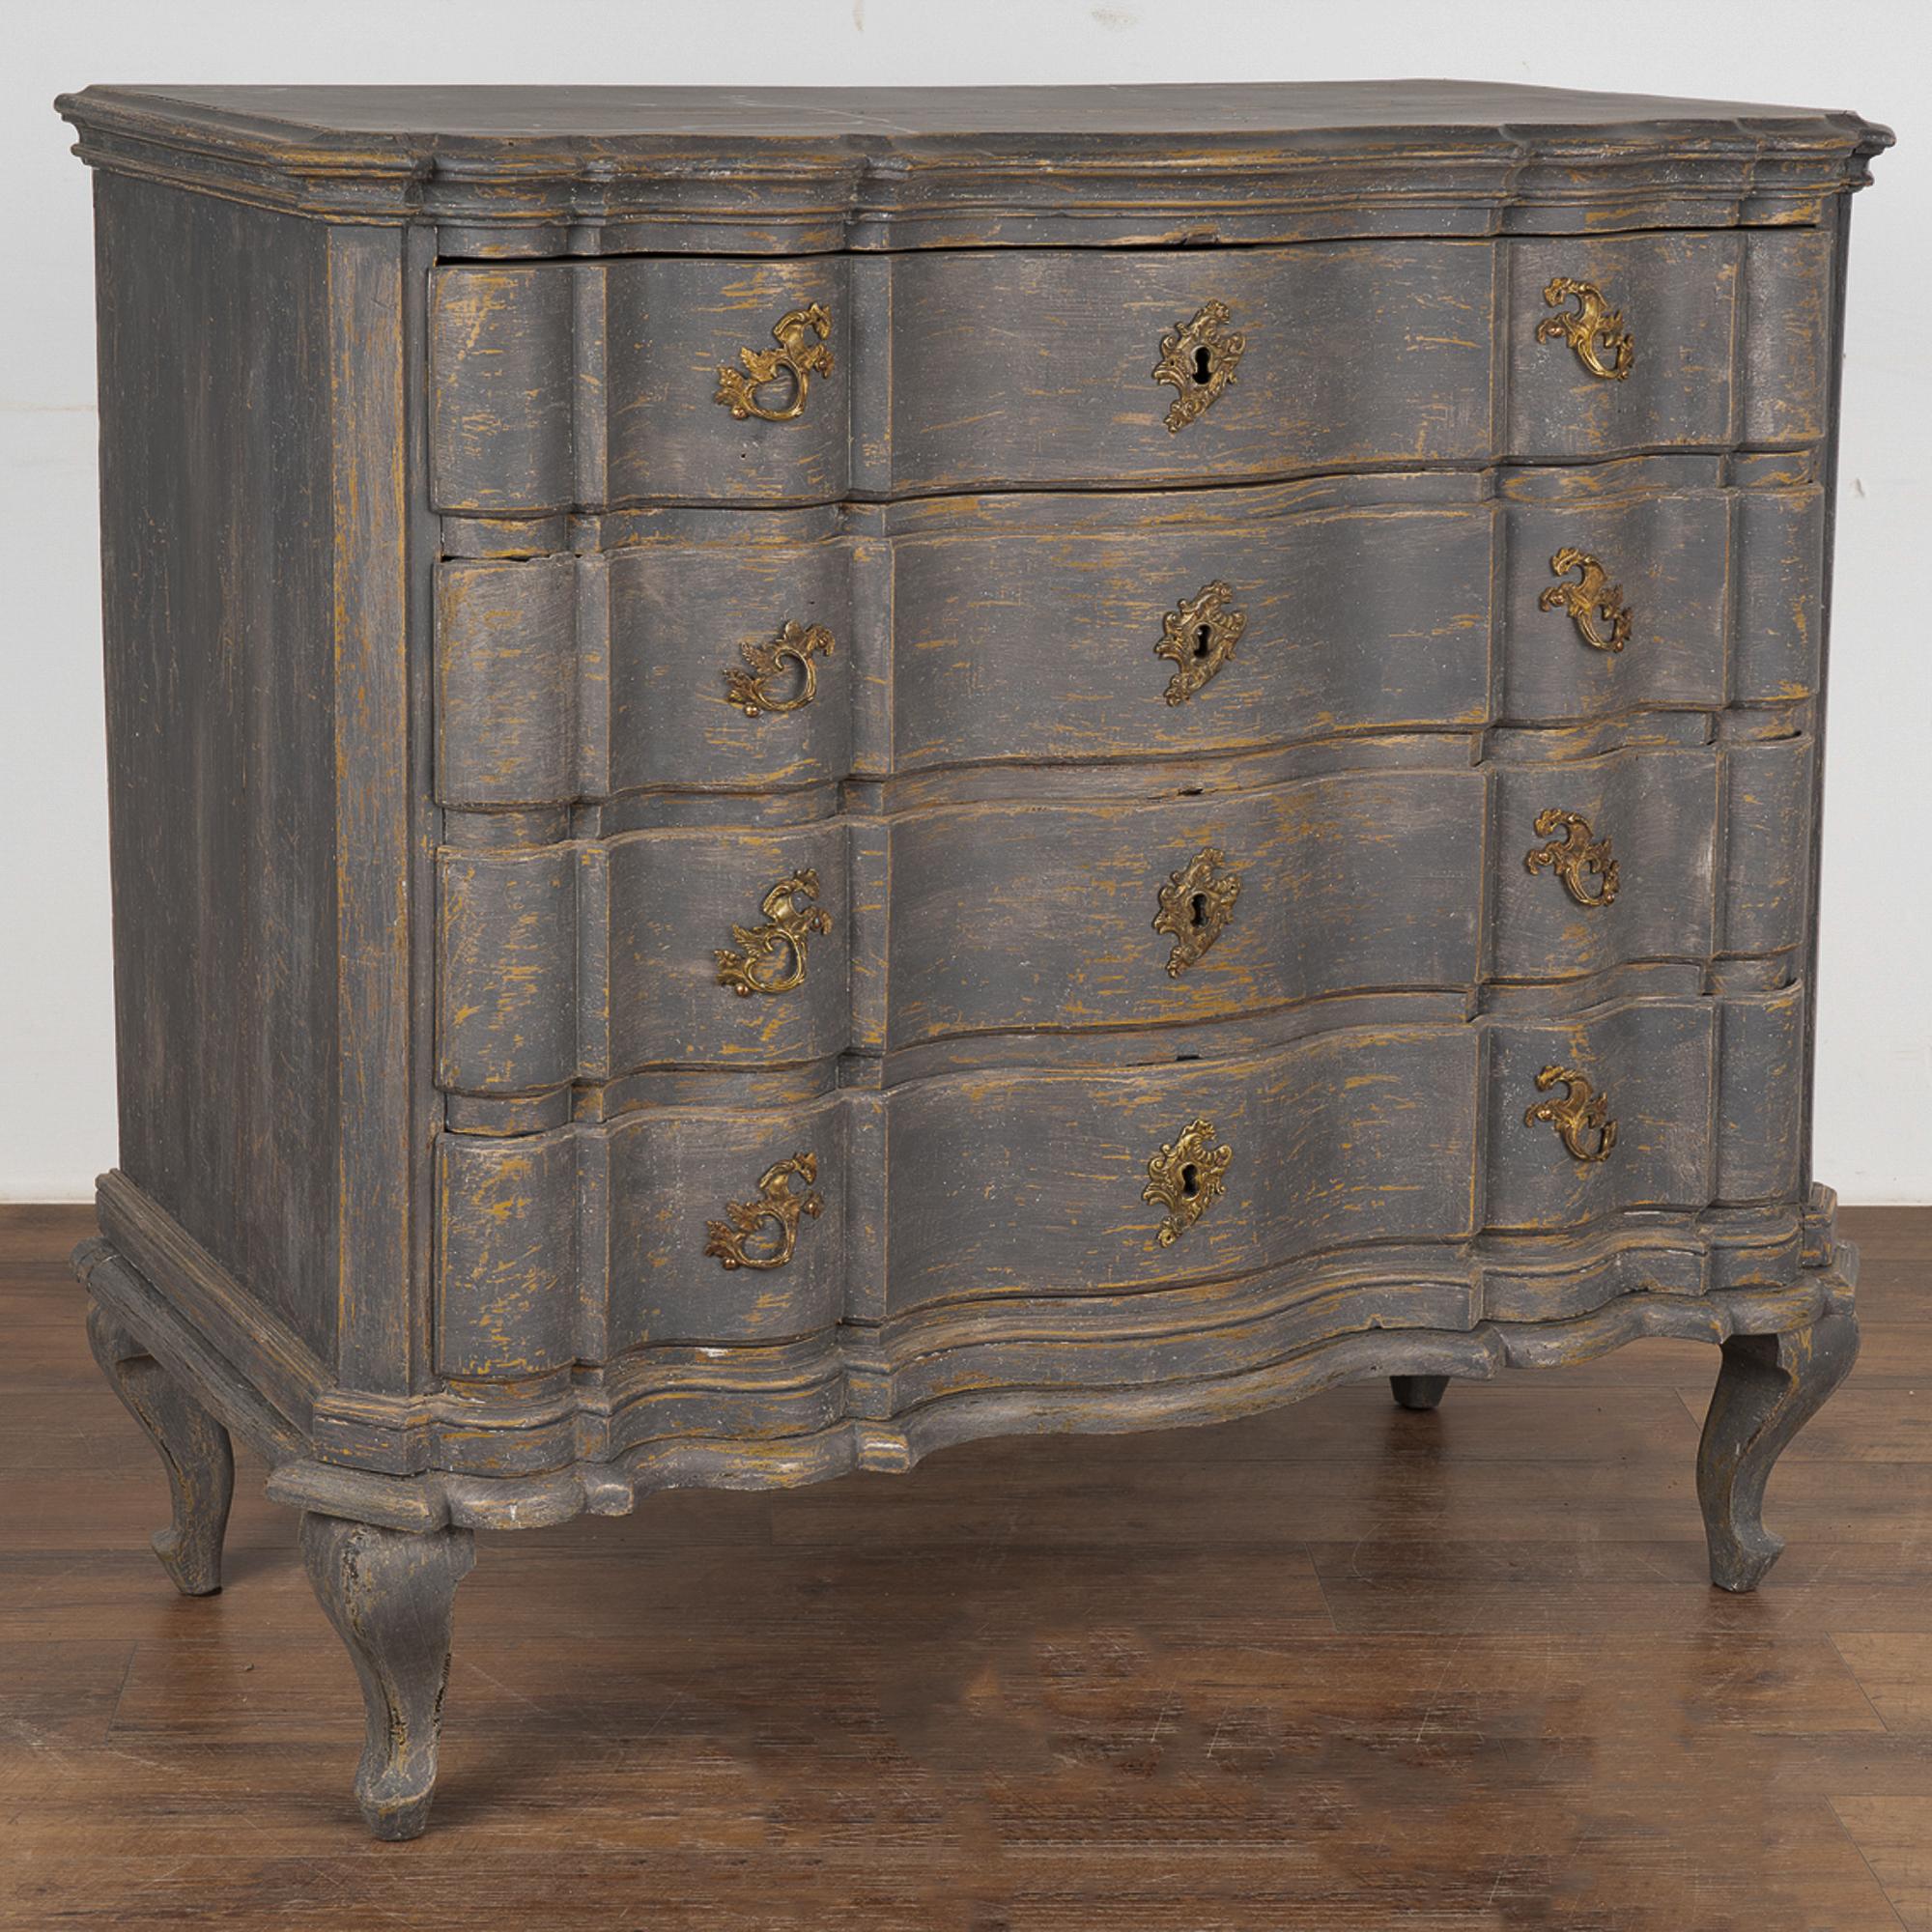 This antique rococo large oak chest of drawers features a serpentine front, brass hardware pulls and is raised on lovely cabriolet feet. 
The newer, professionally applied and layered gray painted finish is gently scraped and distressed, revealing